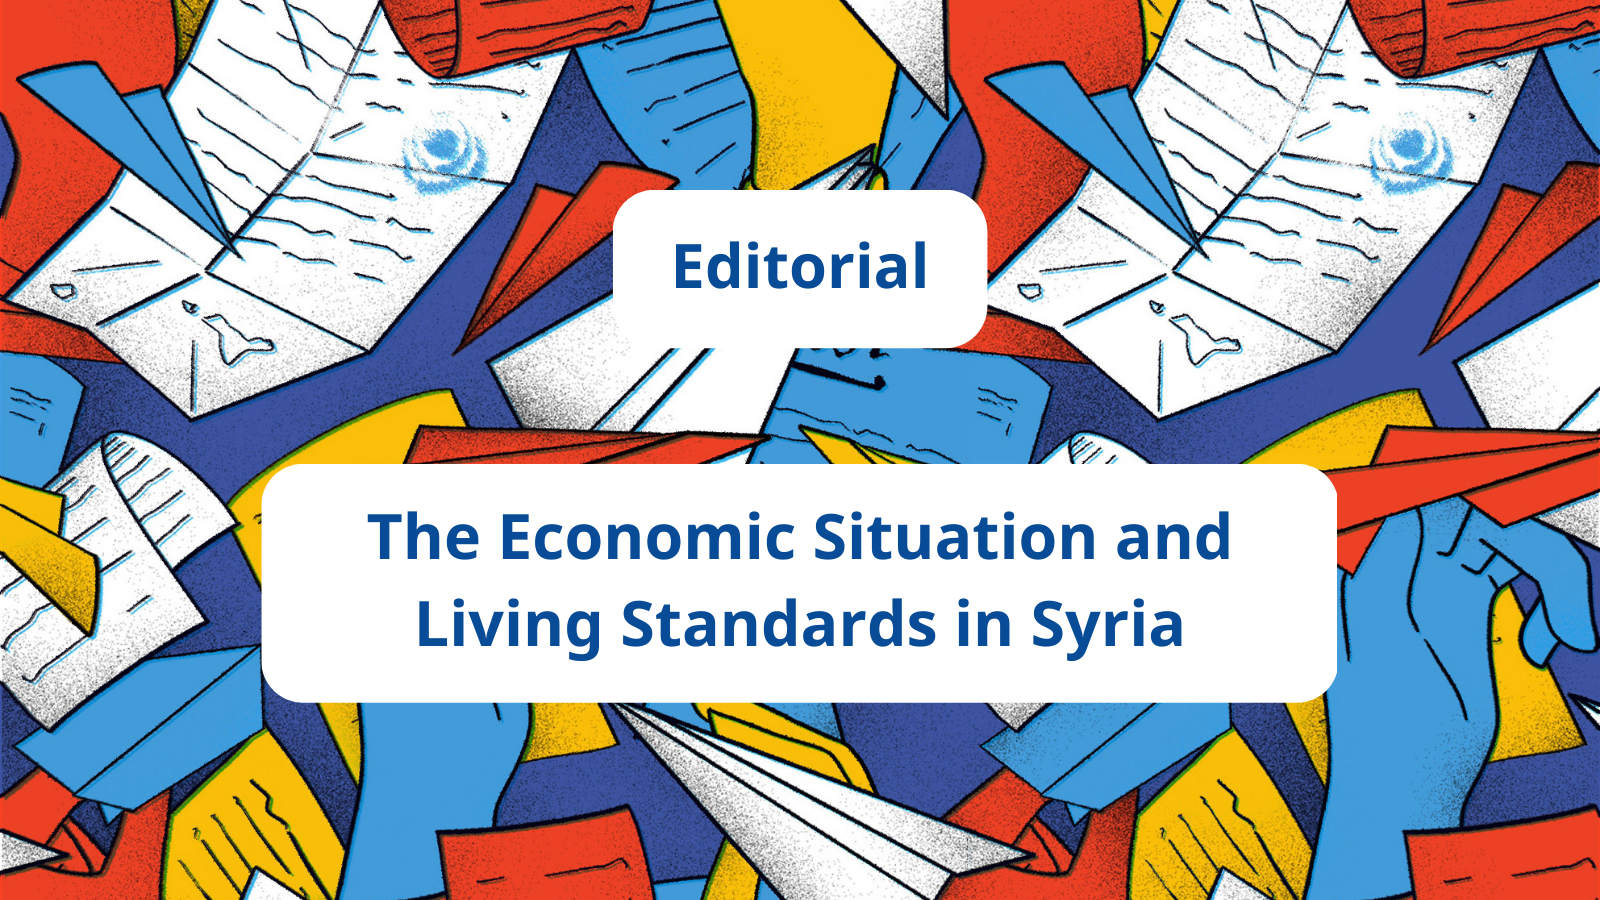 The Economic Situation and Living Standards in Syria